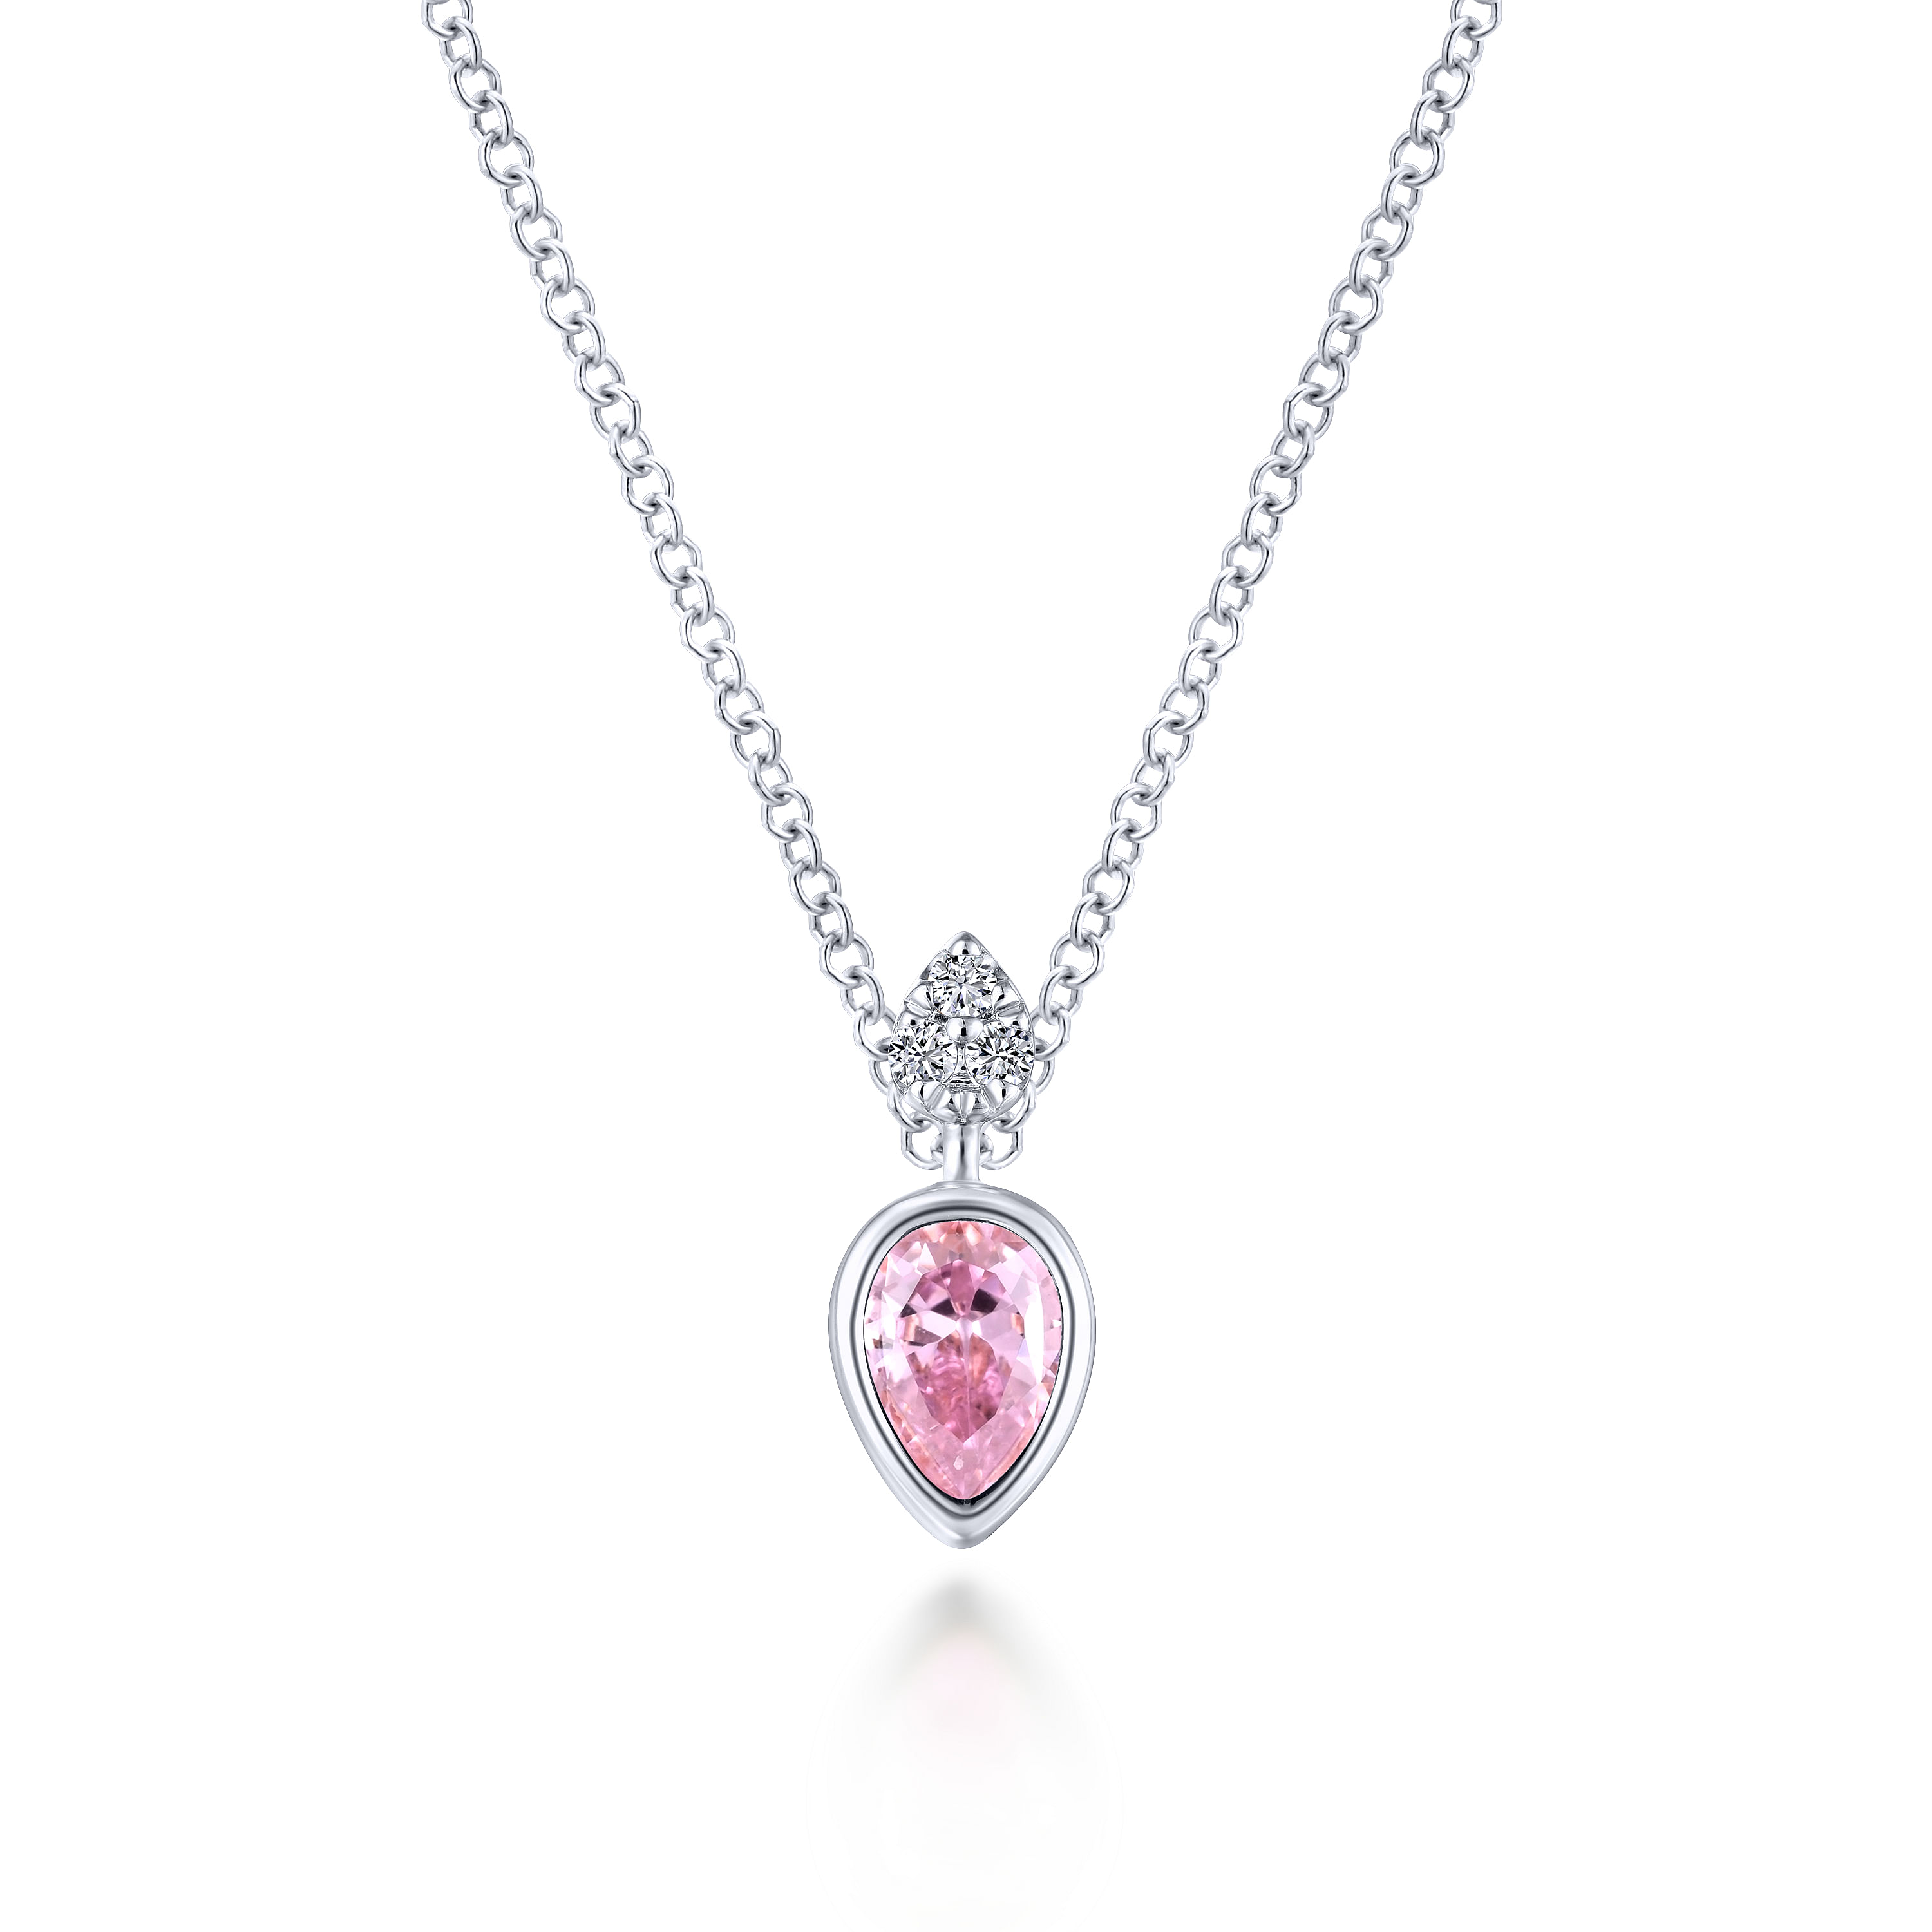 14K White Gold Pink Created Zircon Pendant Necklace with Diamond Accents